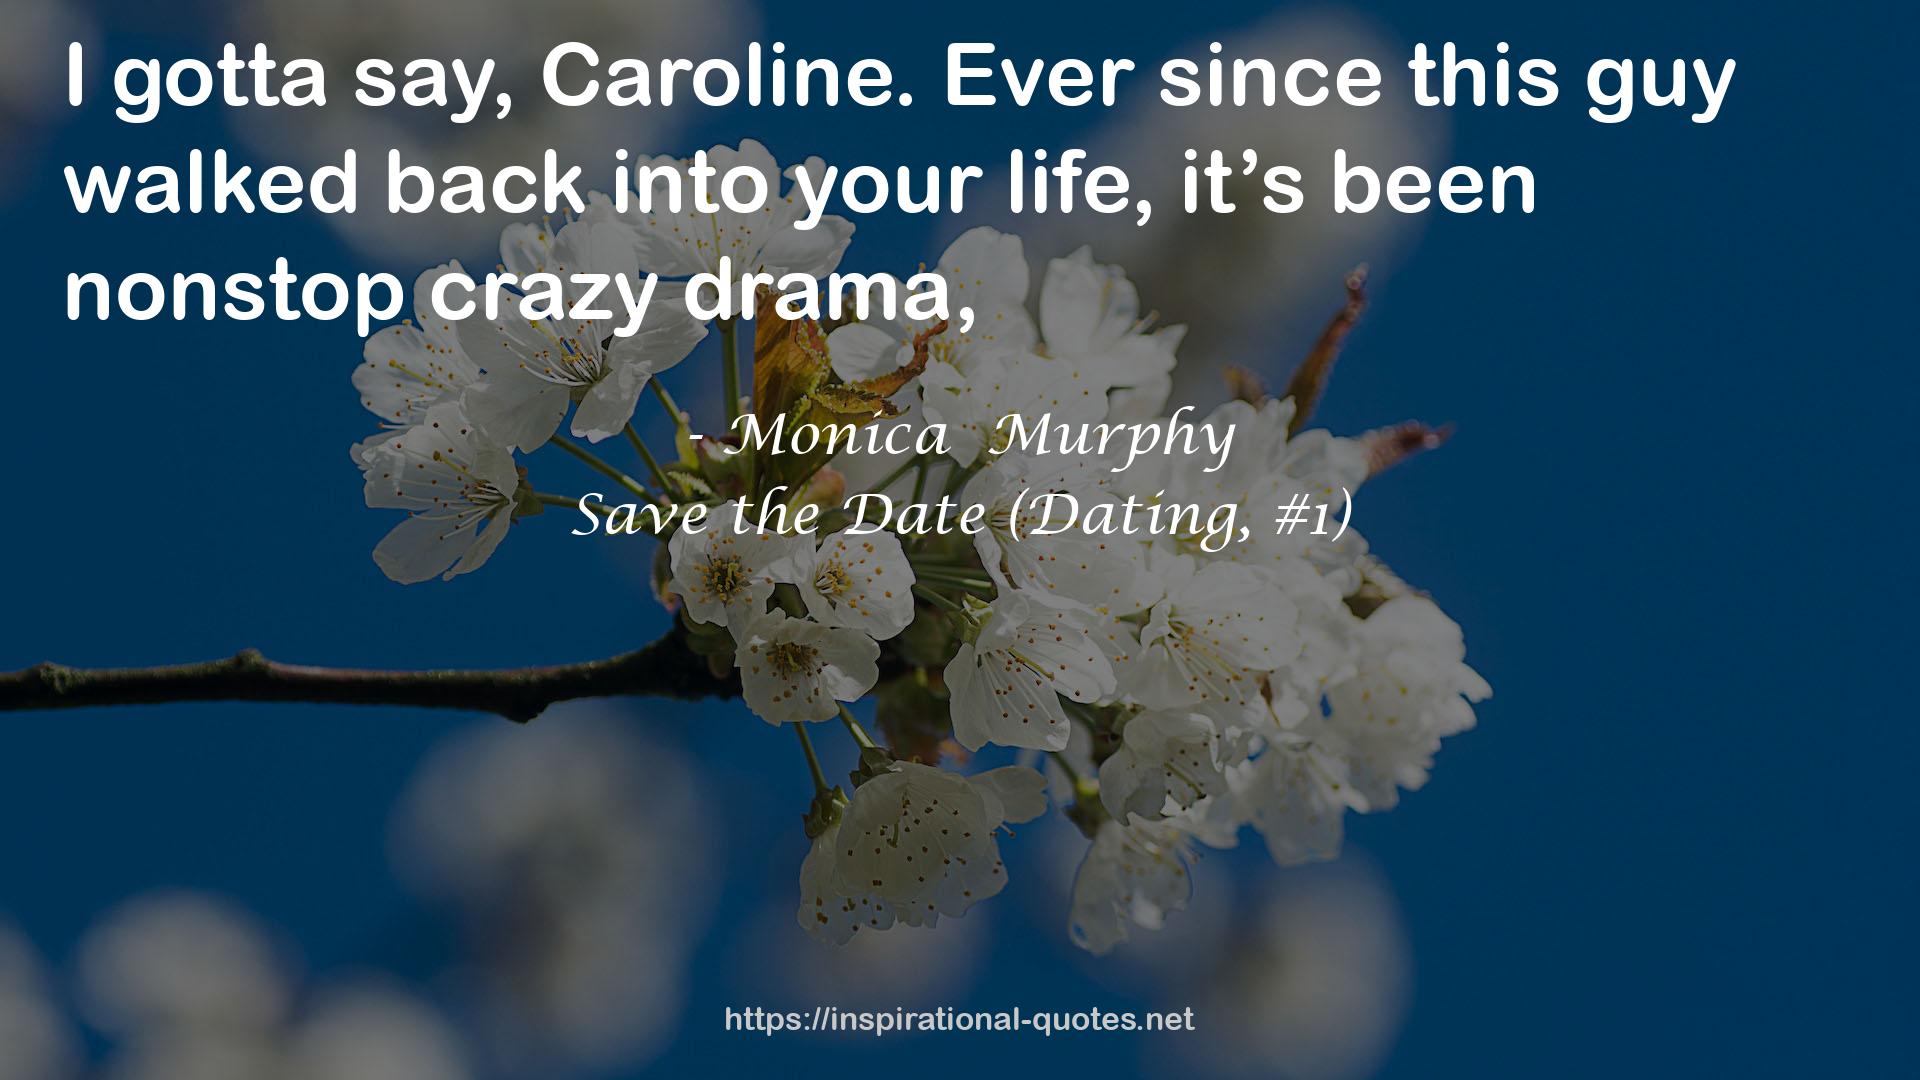 Save the Date (Dating, #1) QUOTES